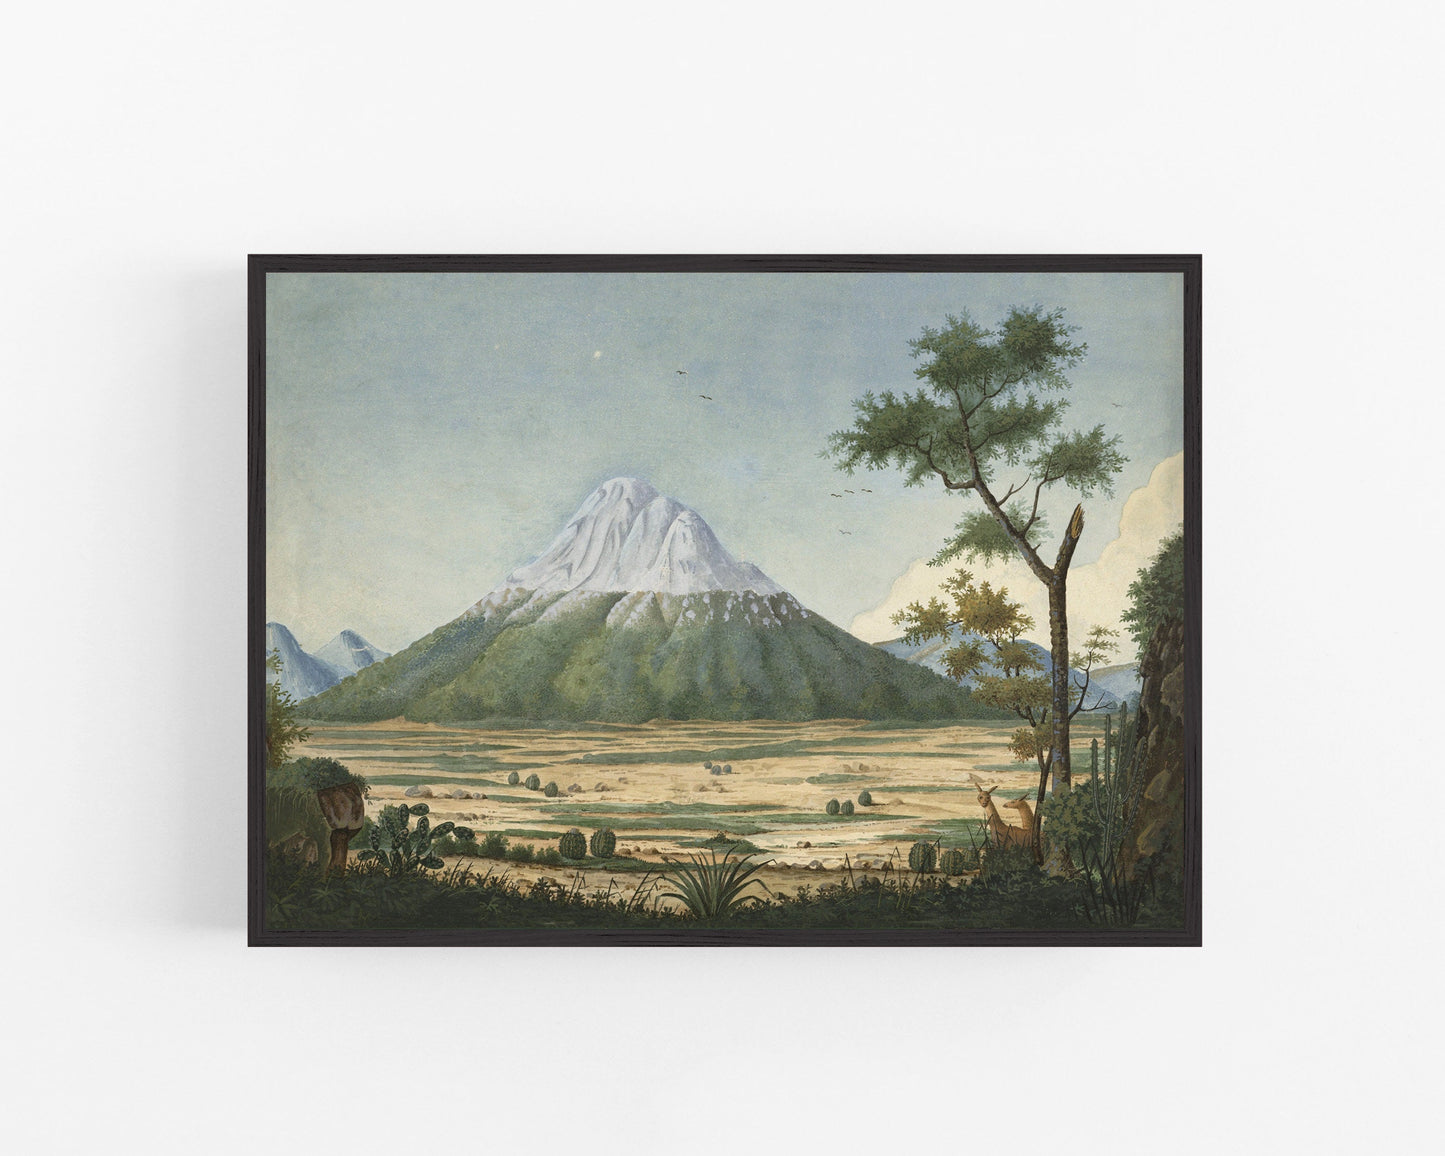 Landscape & llama art | Tropical scene with white capped mountain print | Modern vintage décor | Eco-friendly gift